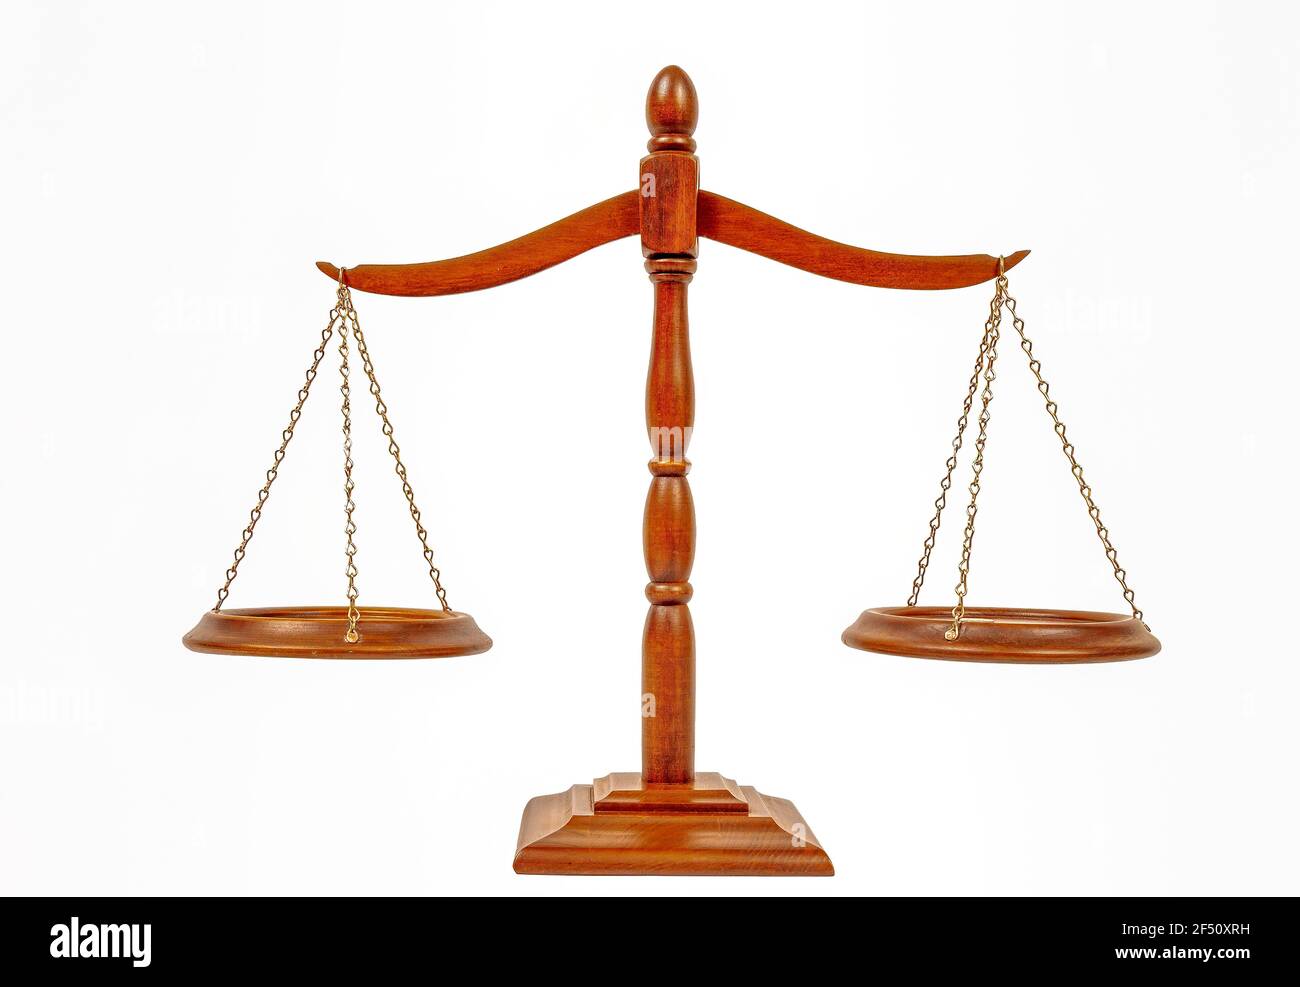 https://c8.alamy.com/comp/2F50XRH/horizontal-shot-of-the-scales-of-justice-on-a-white-background-2F50XRH.jpg